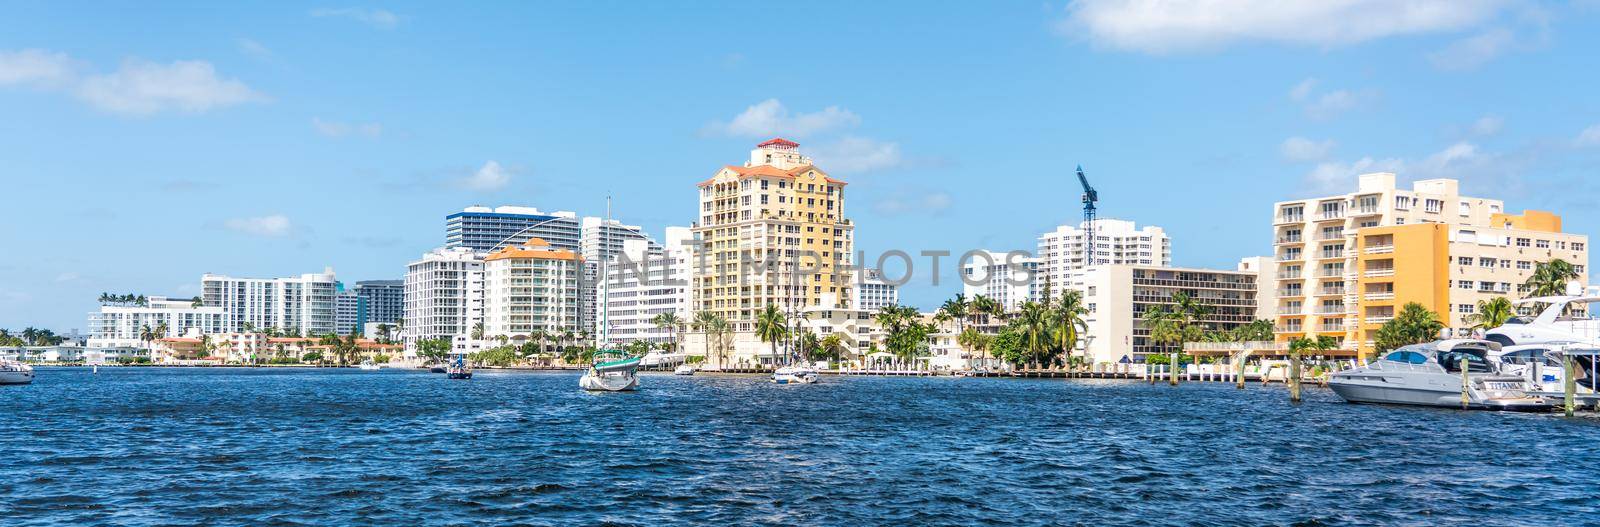 FORT LAUDERDALE, FLORIDA - September 20, 2019: Panorama of skyline of Fort Lauderdale from the canal by Mariakray